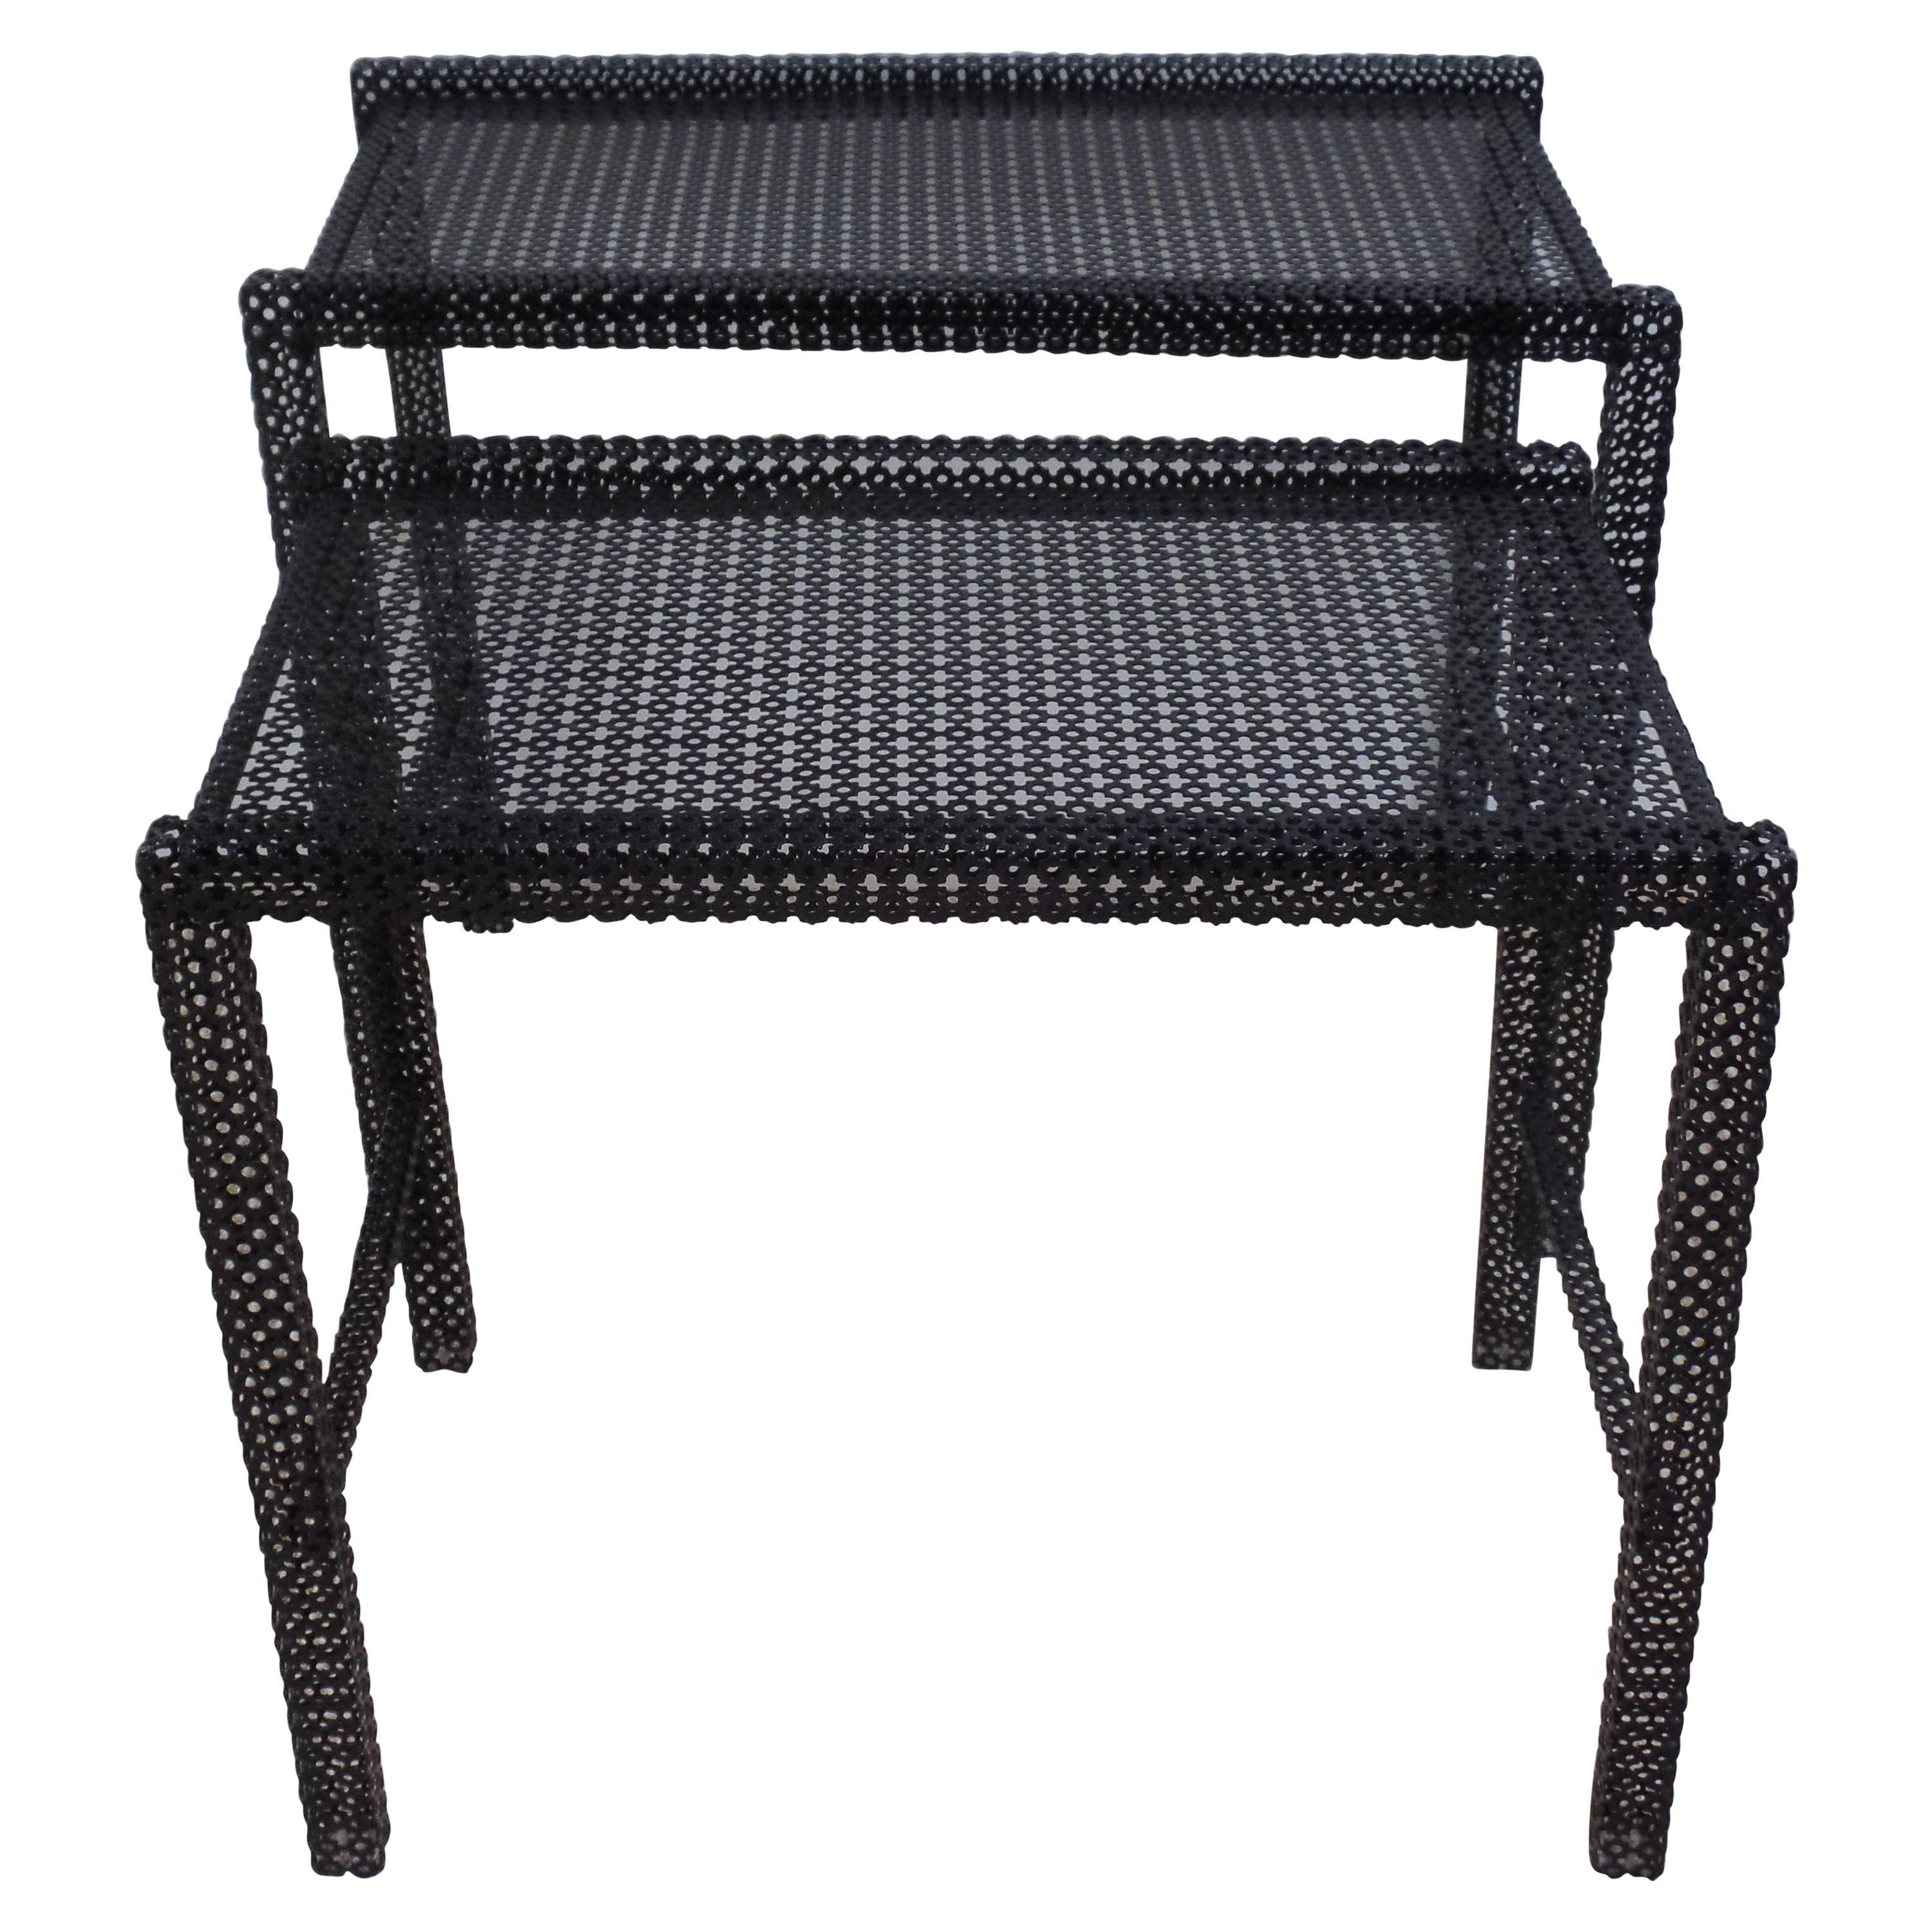 Rare and Elegant pair of French Mid-Century Modern nesting/ side tables or cocktail tables in perforated steel by Mathieu Matégot. The pieces are enameled black. The tables represent the essence of the modernist aesthetic: rational and quadratic